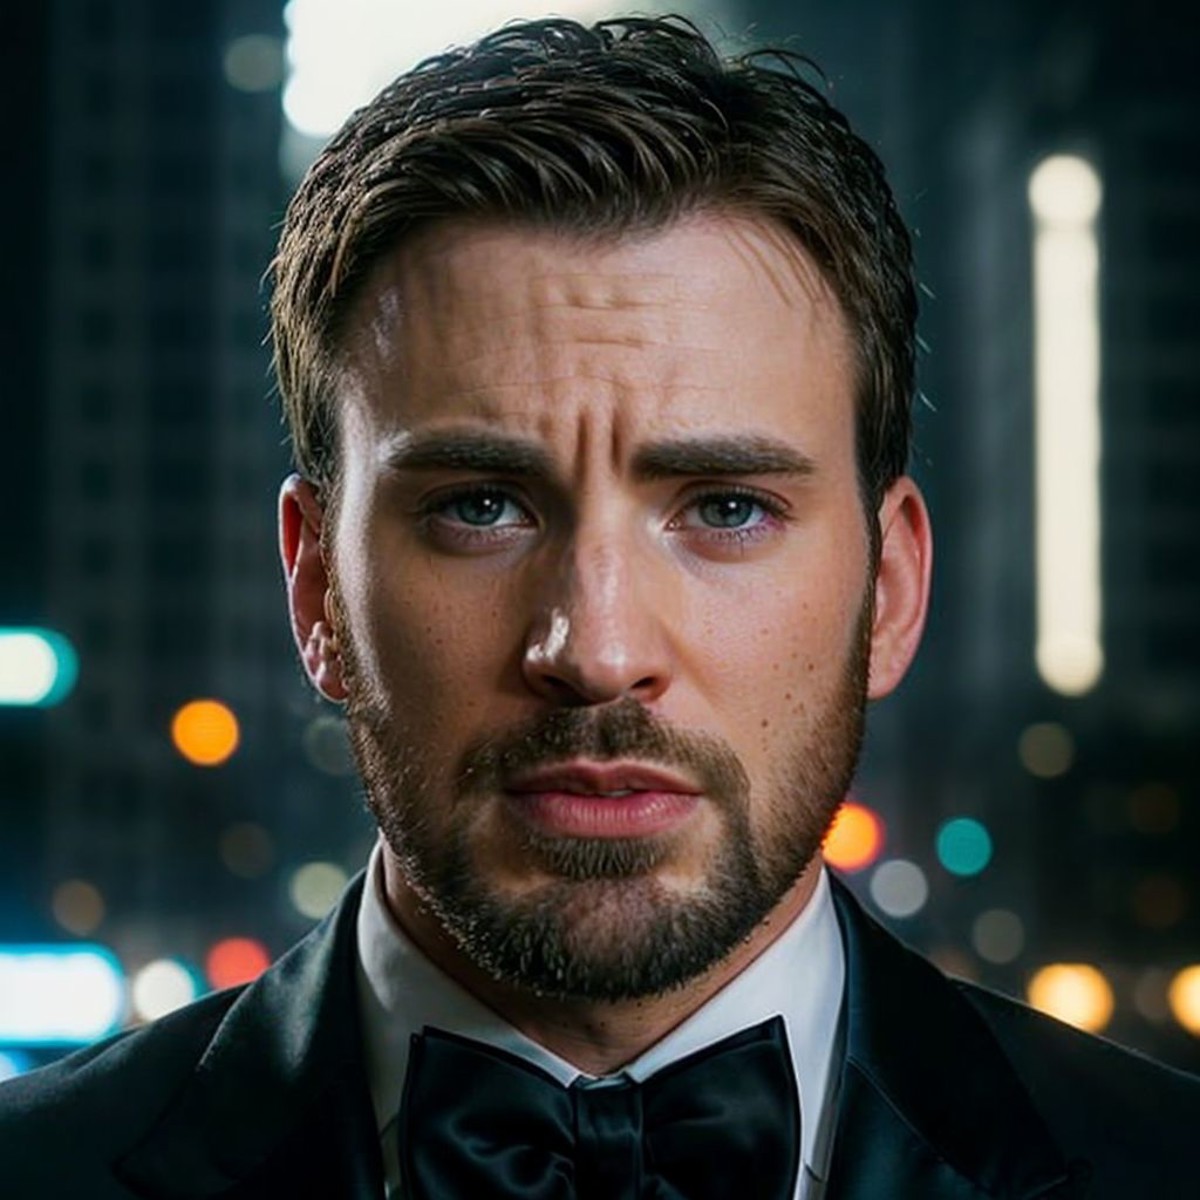 face portrait of chrisevans person using a tuxedo, in blade runner, professional photography, high resolution, 4k, detaile...